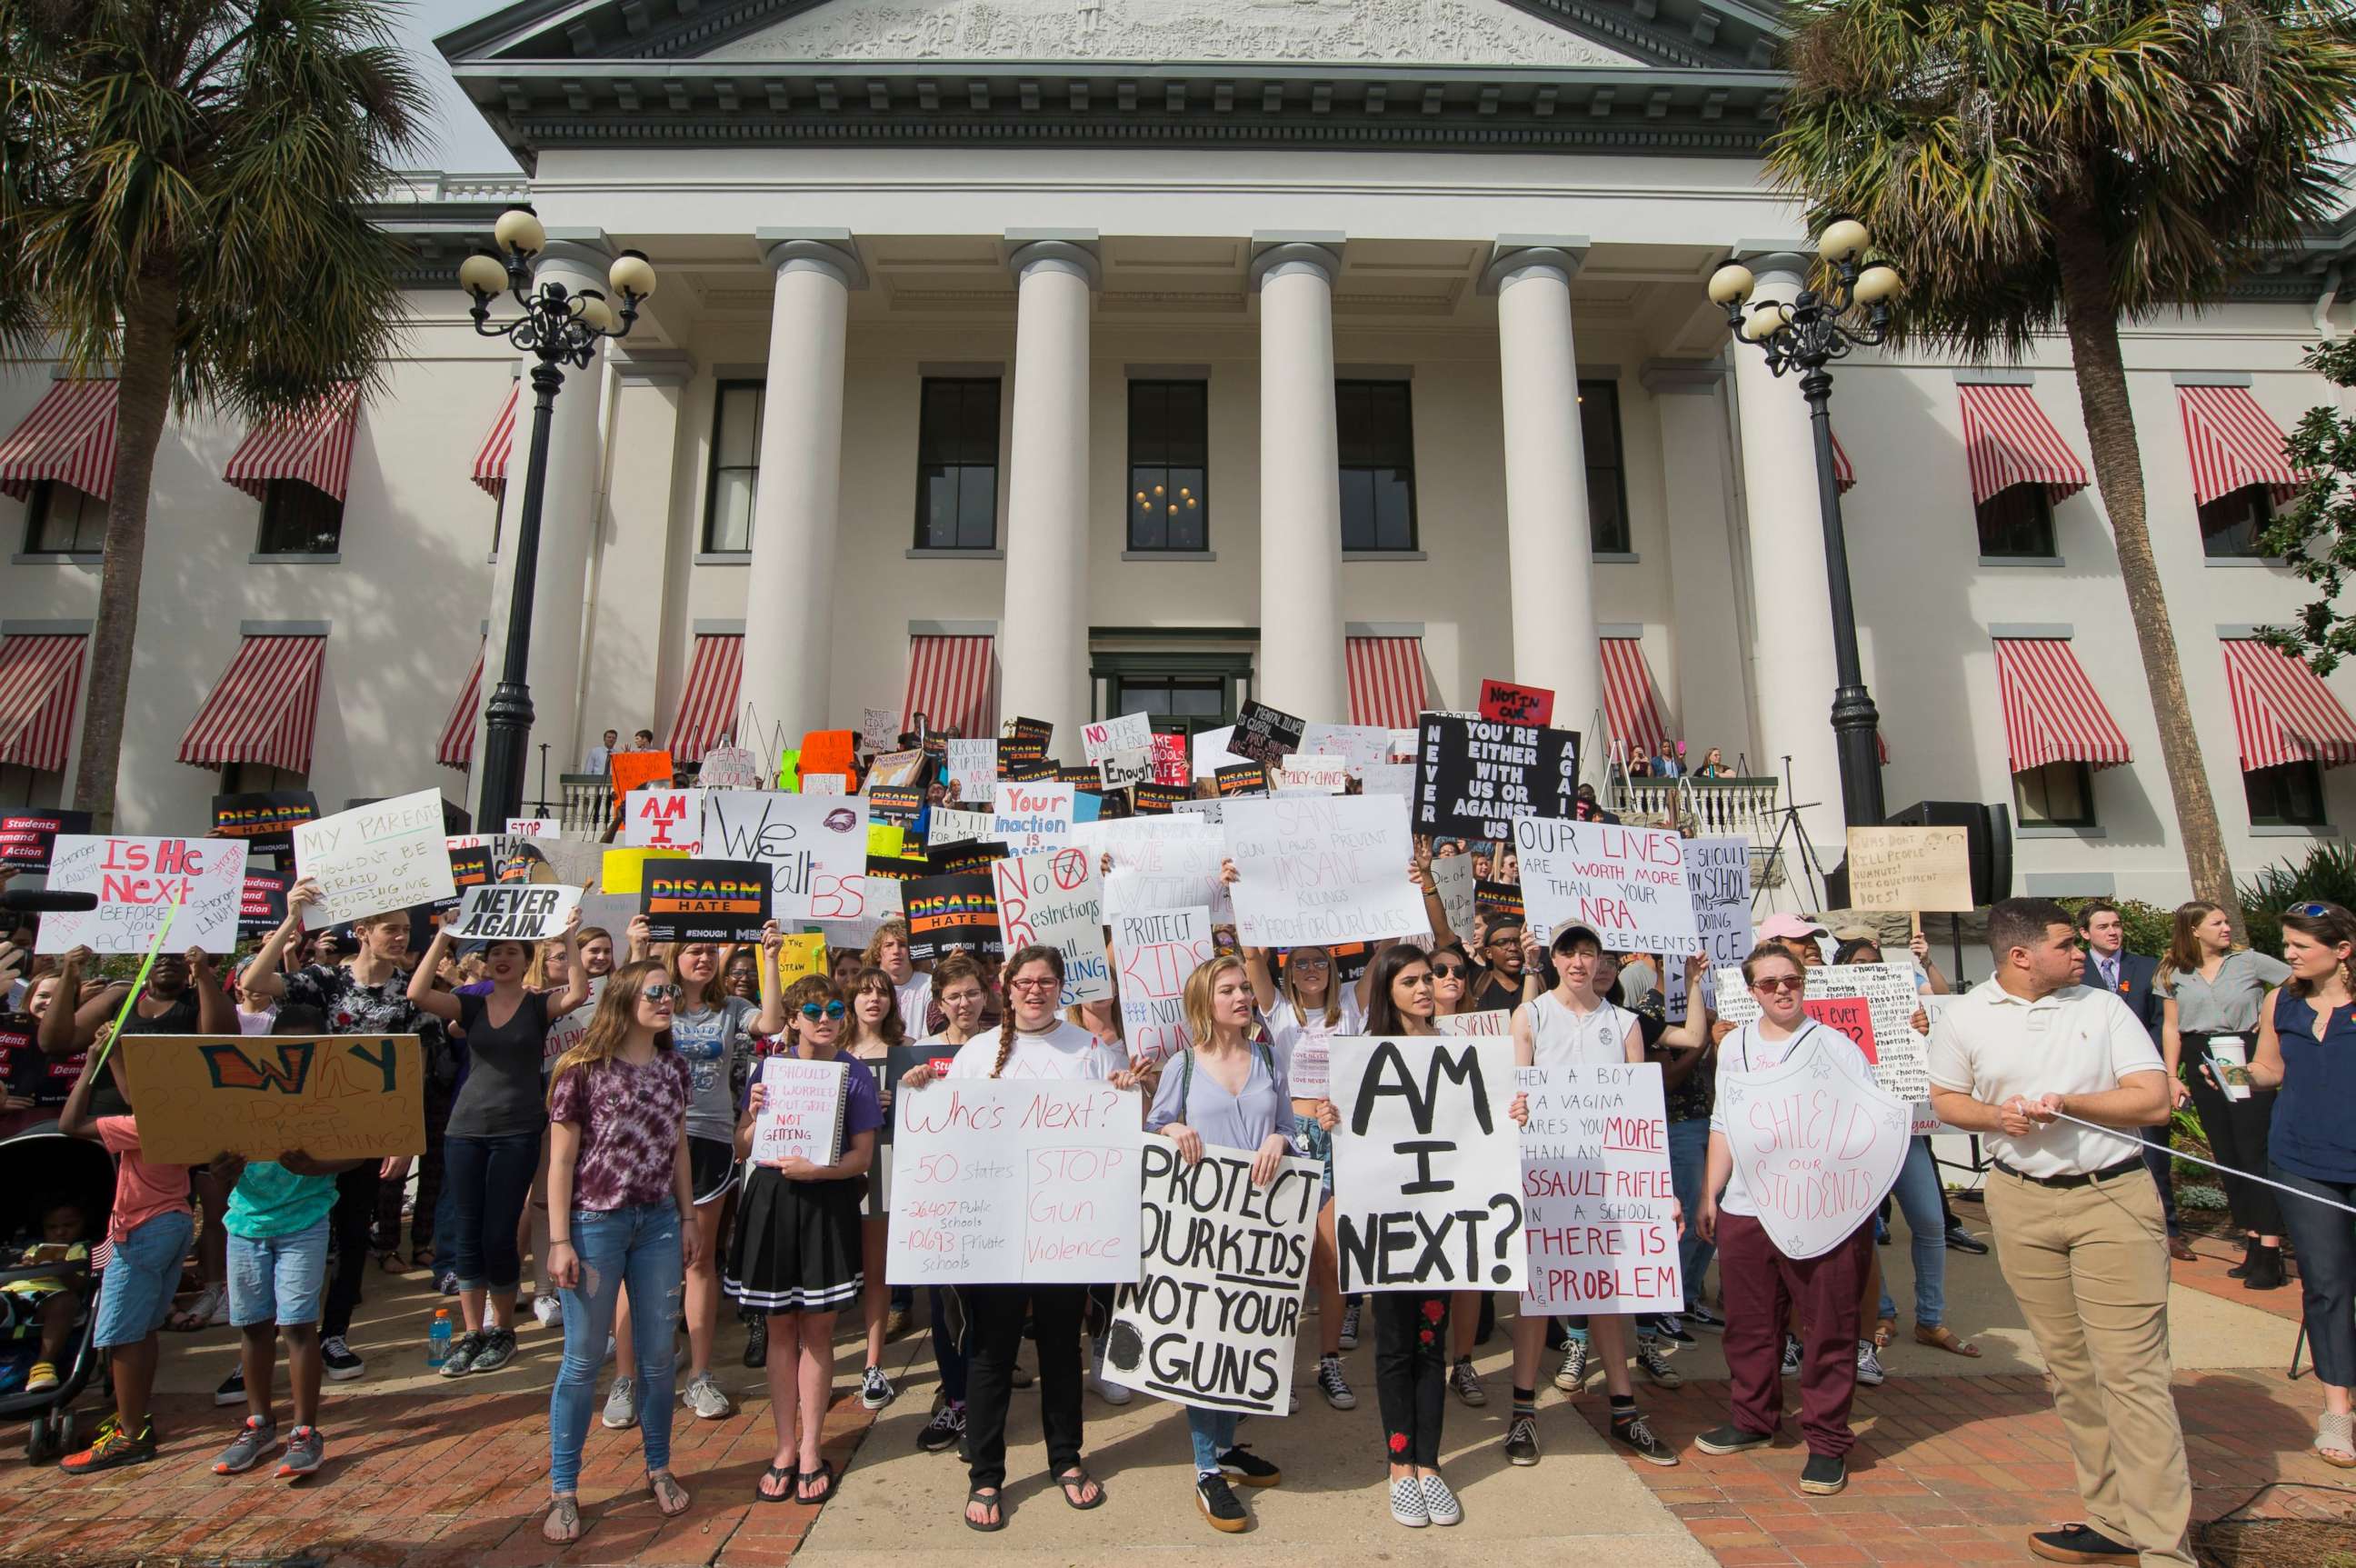 PHOTO: Protesters gather at the Florida state Capitol in Tallahassee on Feb. 21, 2018 to push for legislation regulating assault-style weapons and guns in general, after a shooting at Marjory Stoneman Douglas High School in Parkland, Fla.
